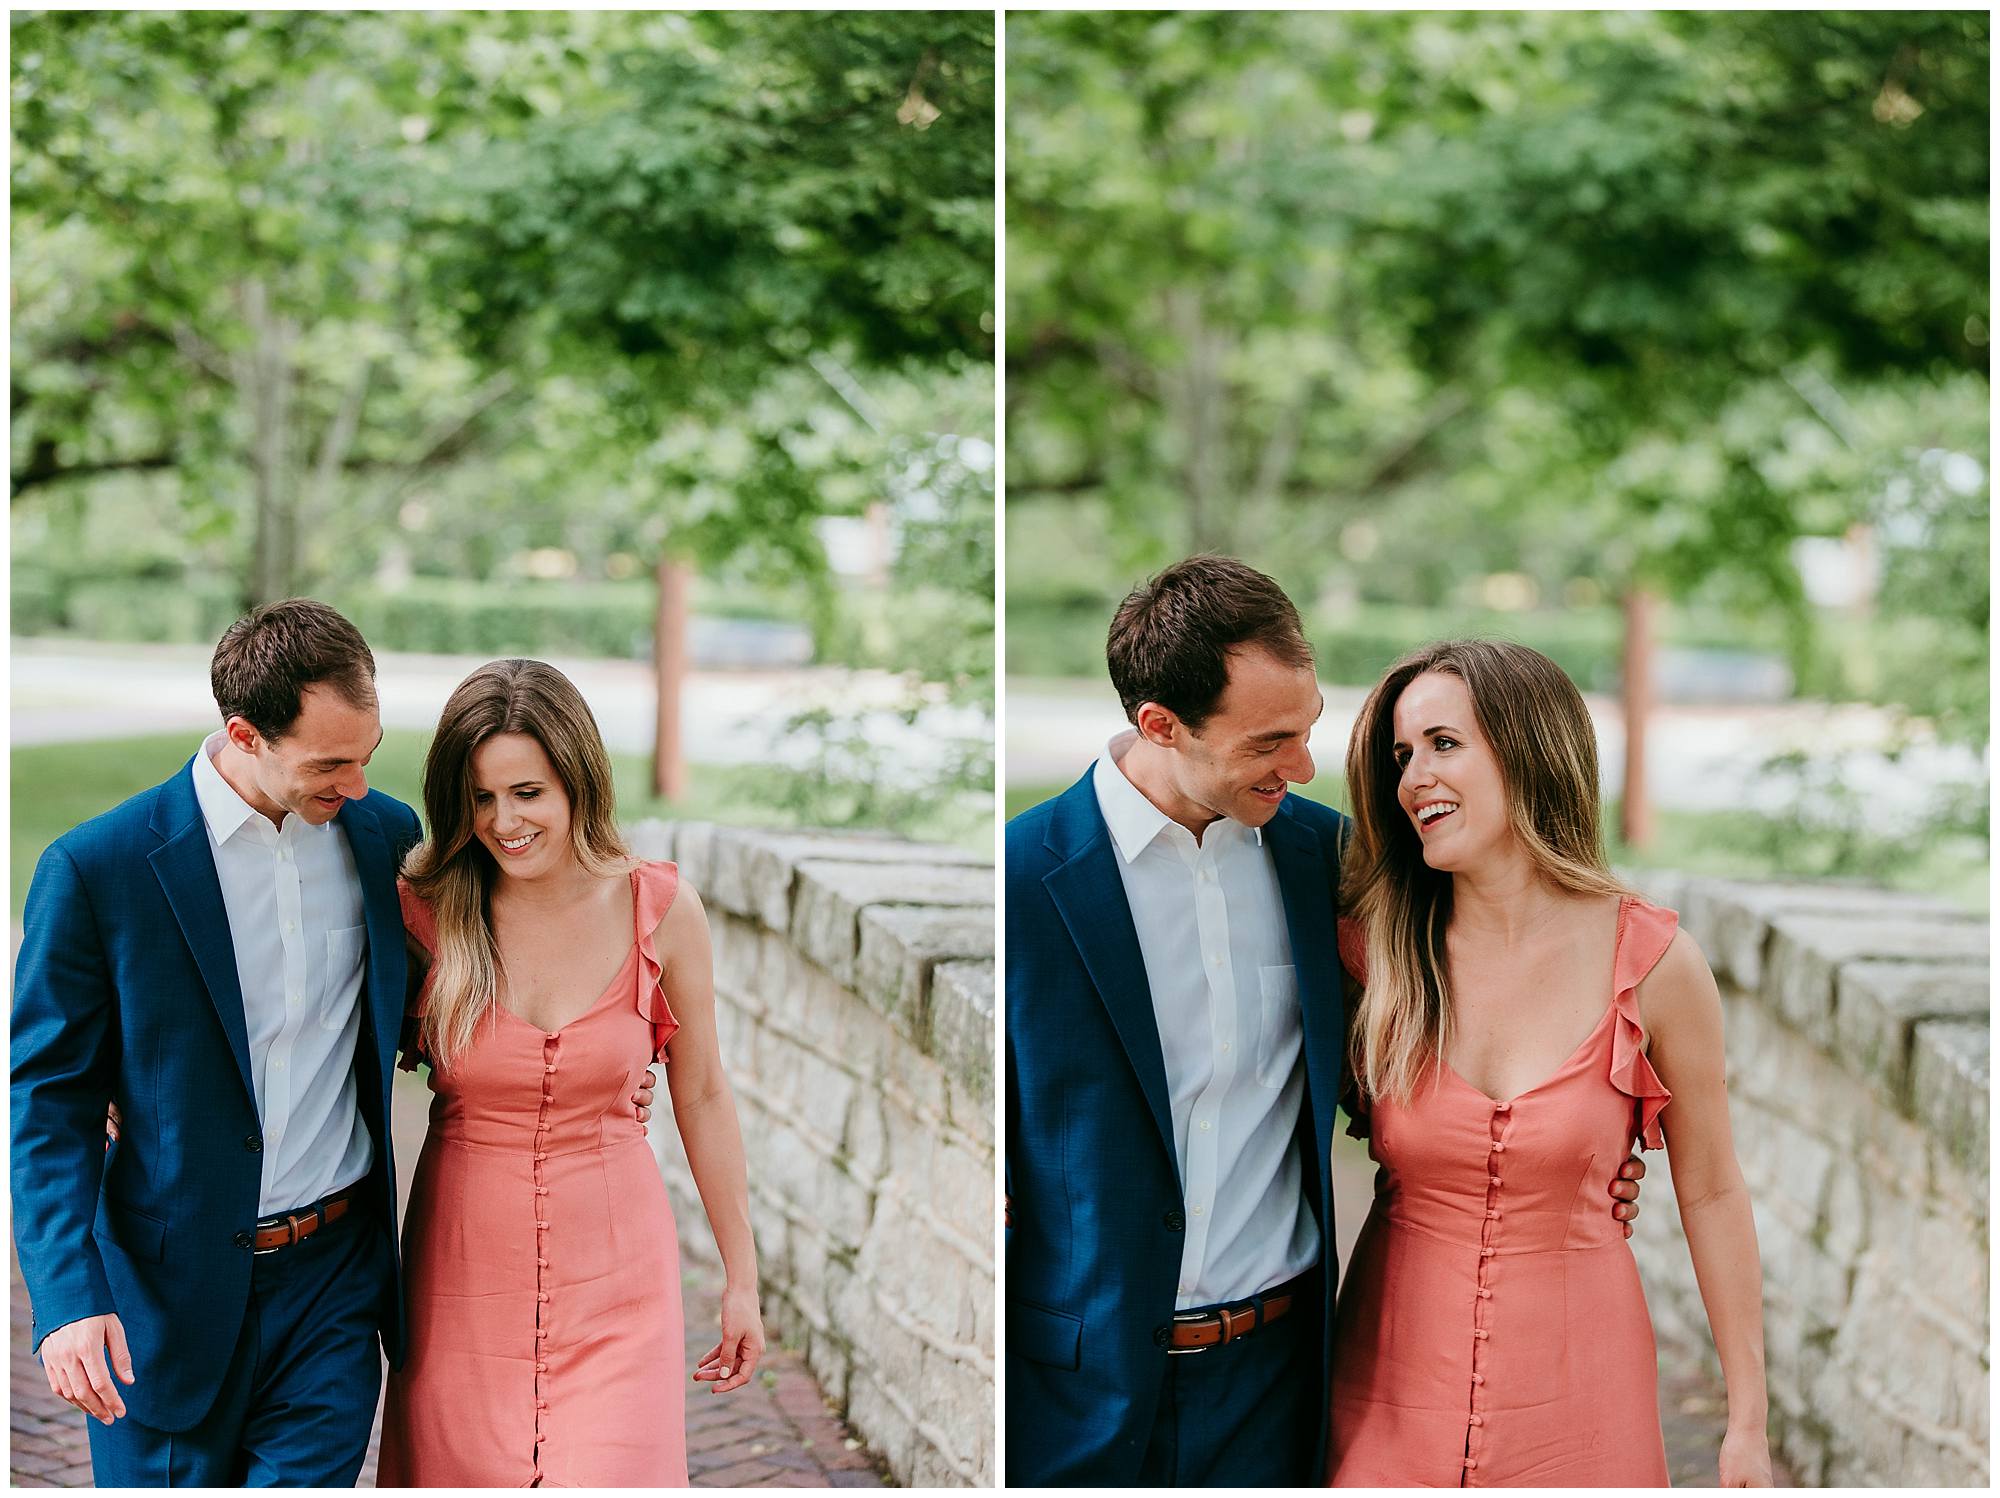 Anchorage Park Engagement Session, Louisville KY, Louisville Wedding Photographer, Engaged, Engagement Session, 